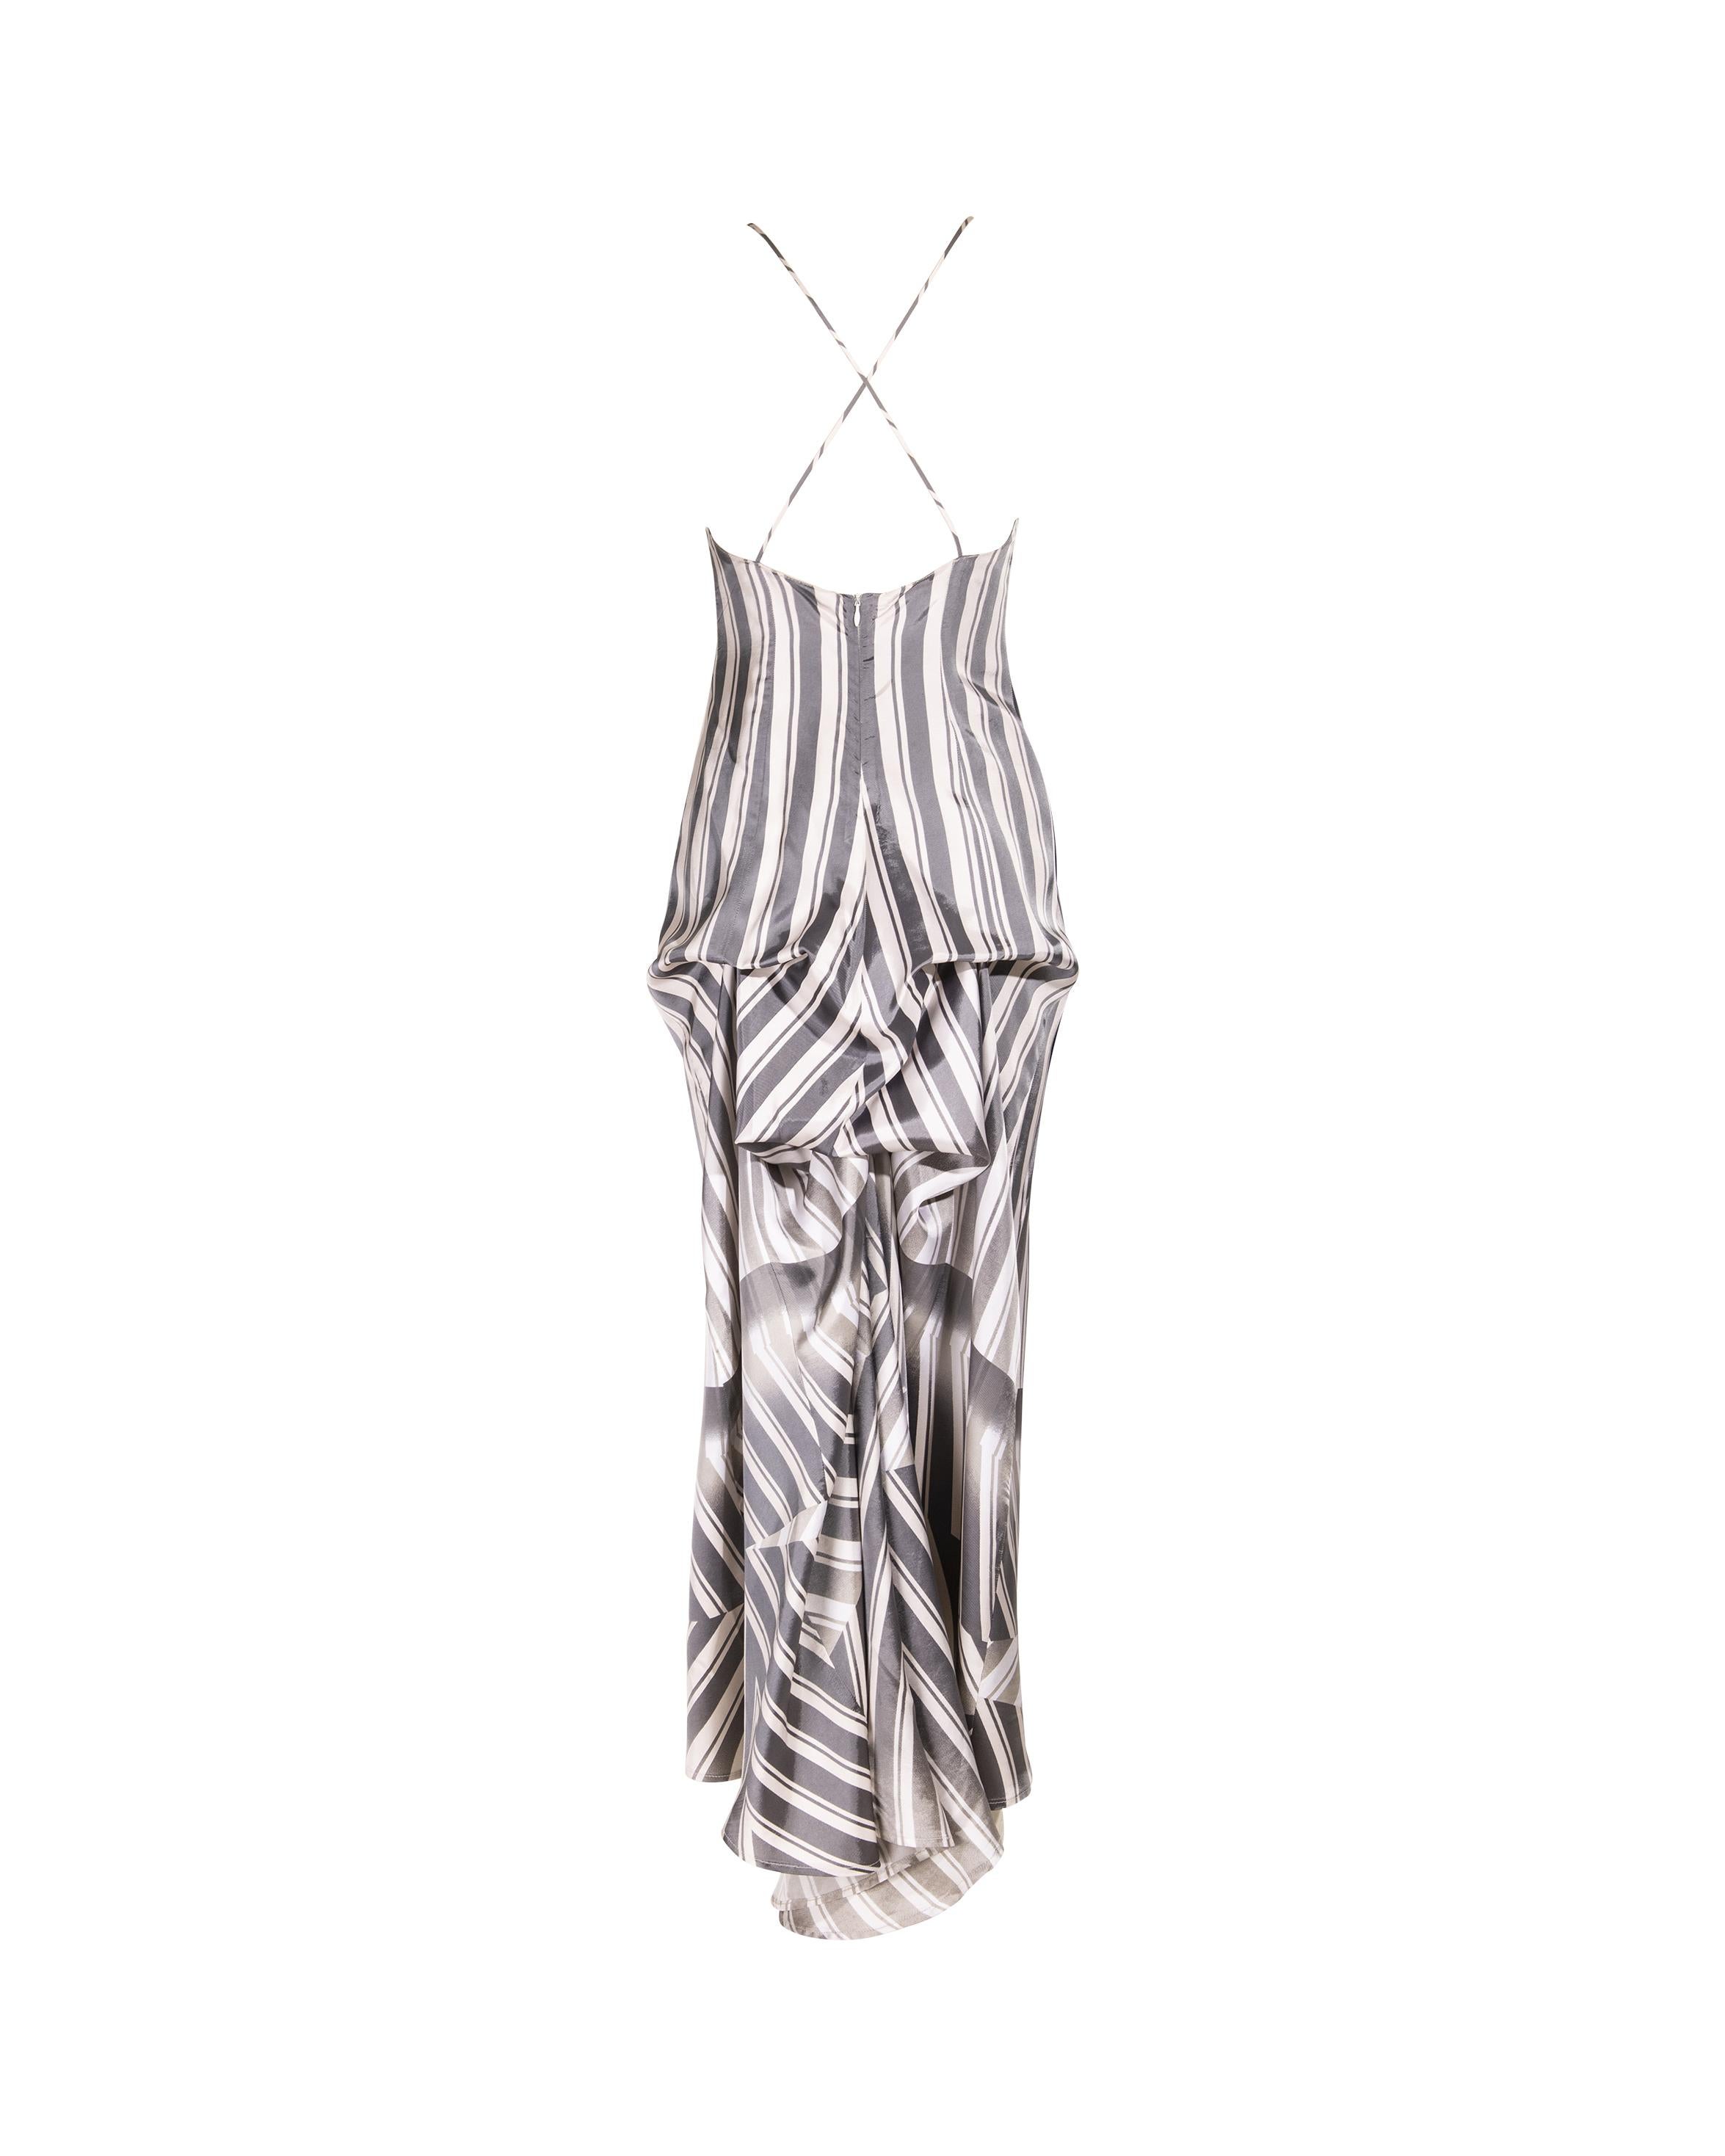 S/S 1999 Dries Van Noten White and Gray Gradient Stripe Bustle Gown In Good Condition For Sale In North Hollywood, CA